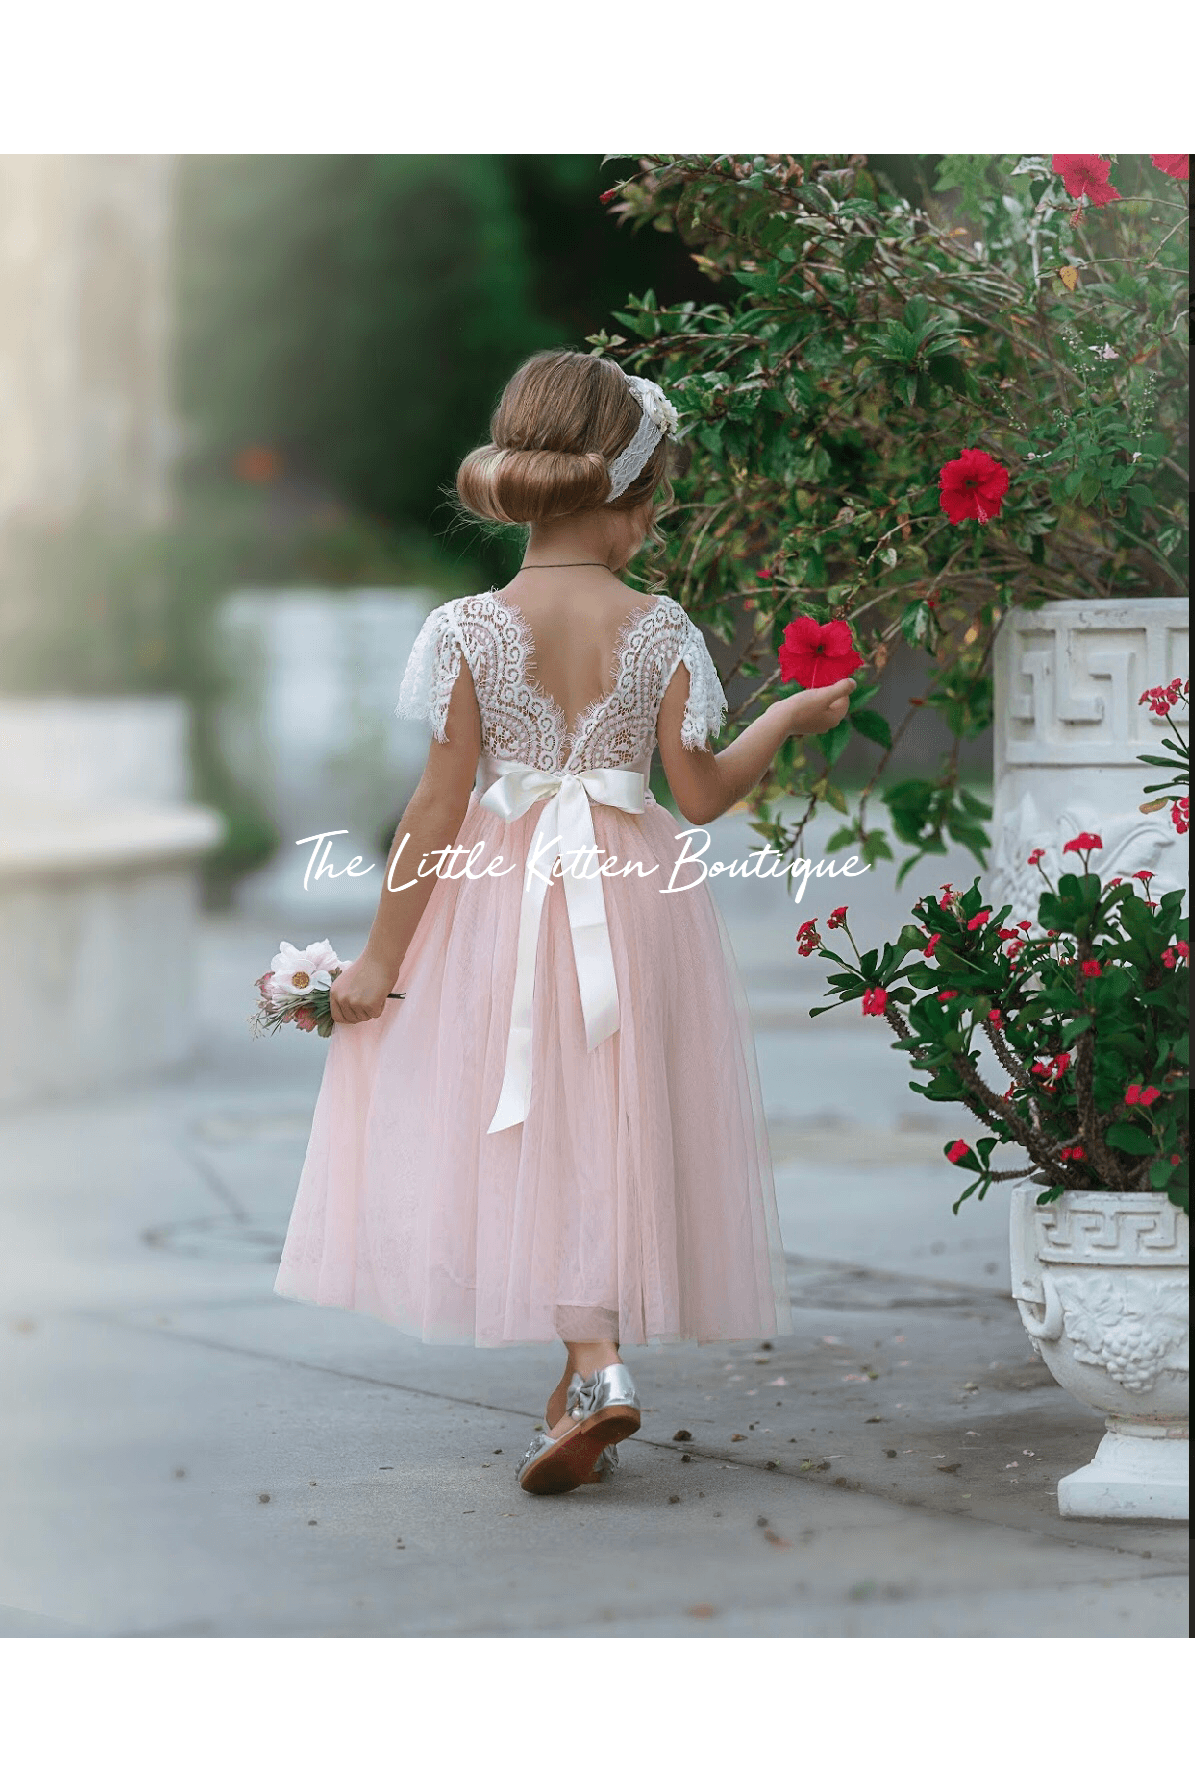 Butterfly Cap Sleeve Special Occasion Lace and tulle flower girl dress - The Little Kitten Boutique